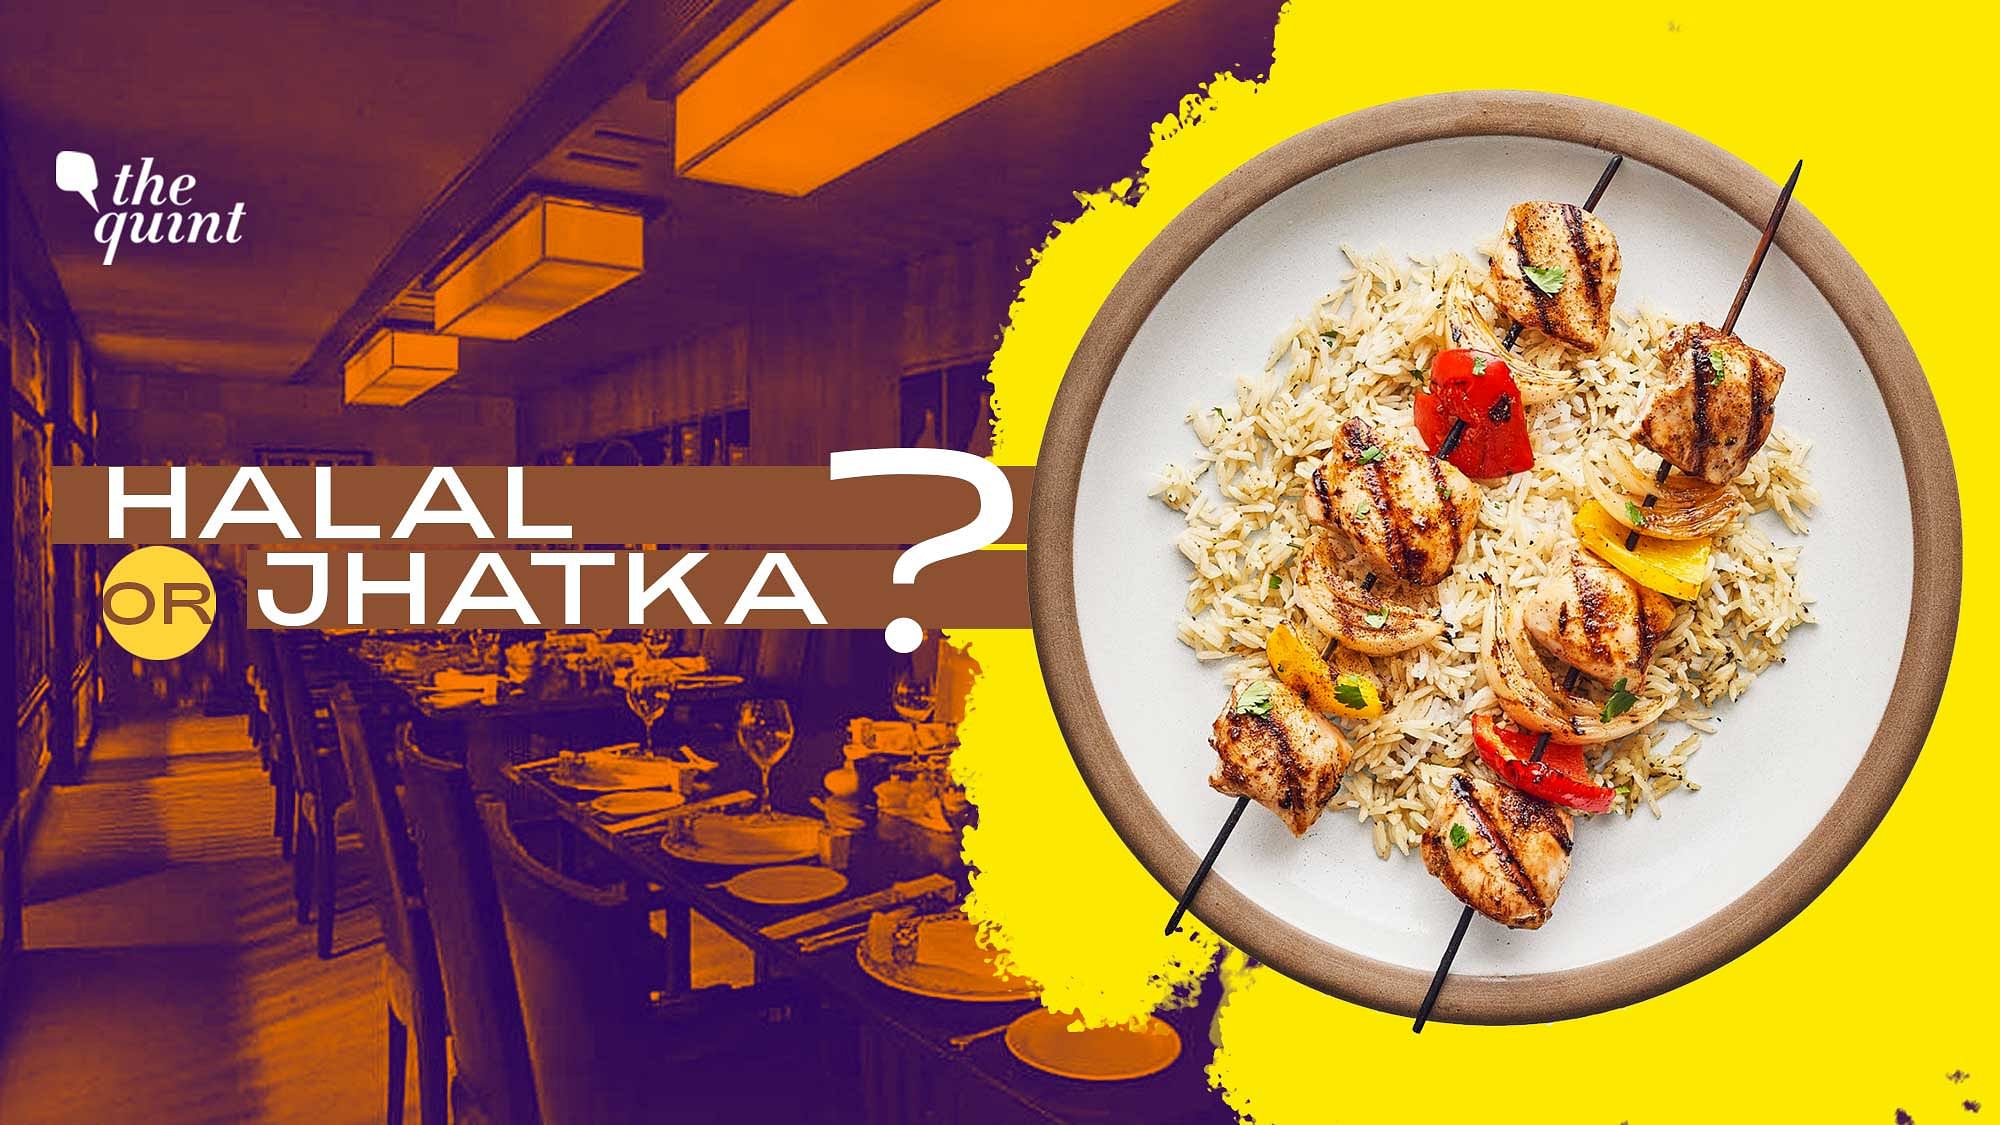 The South Delhi Municipal Corporation has cleared a proposal making it mandatory for restaurants to declare whether the meat they are serving is ‘halal’ or ‘jhatka’.